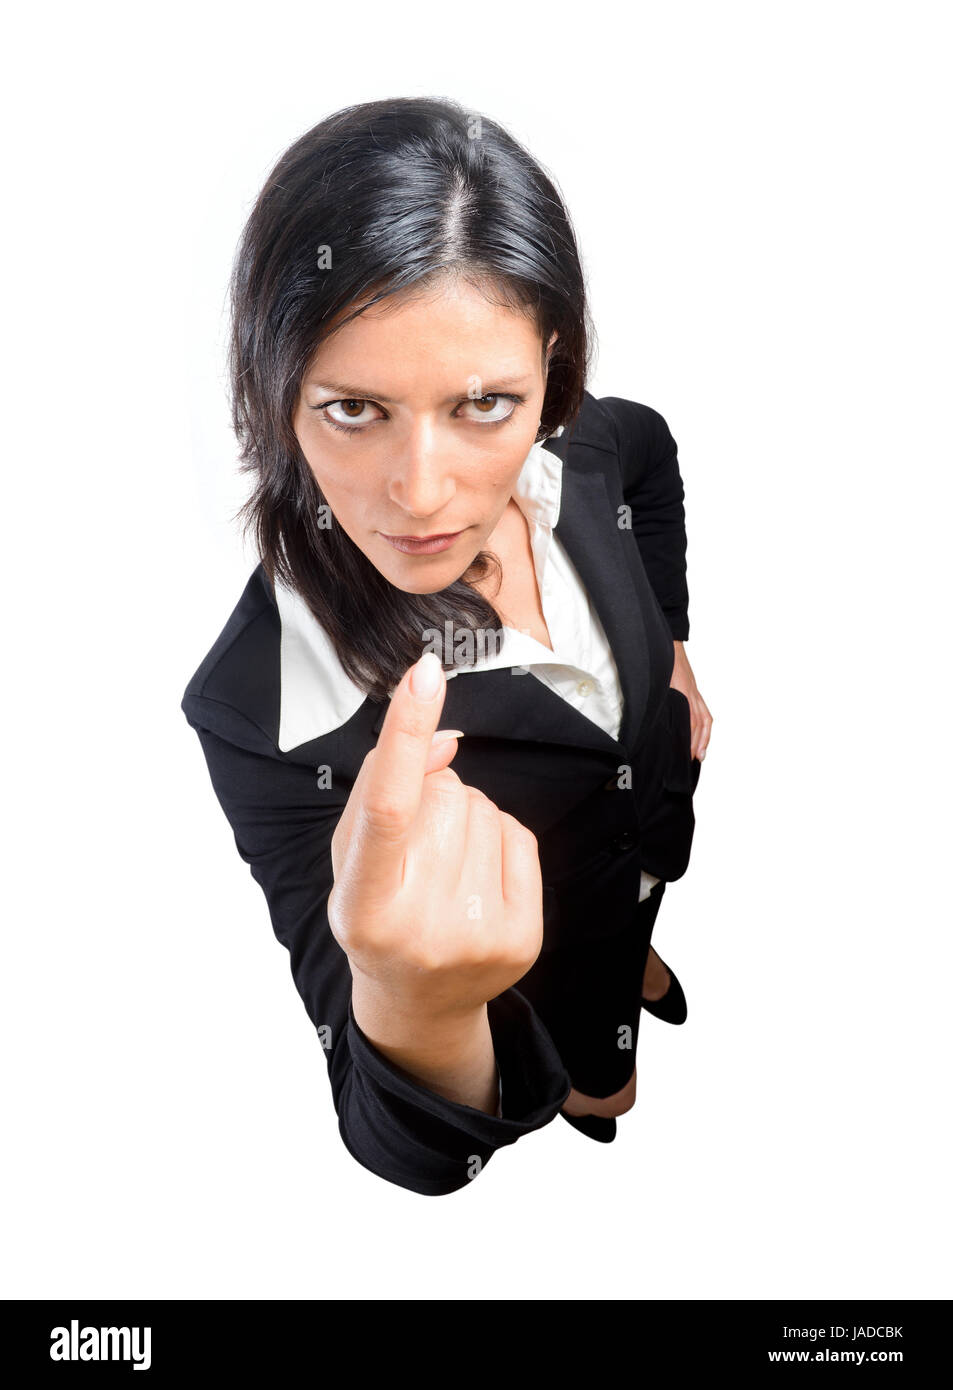 Funny image of young business woman upset looking at the camera. Isolated on white background. Stock Photo